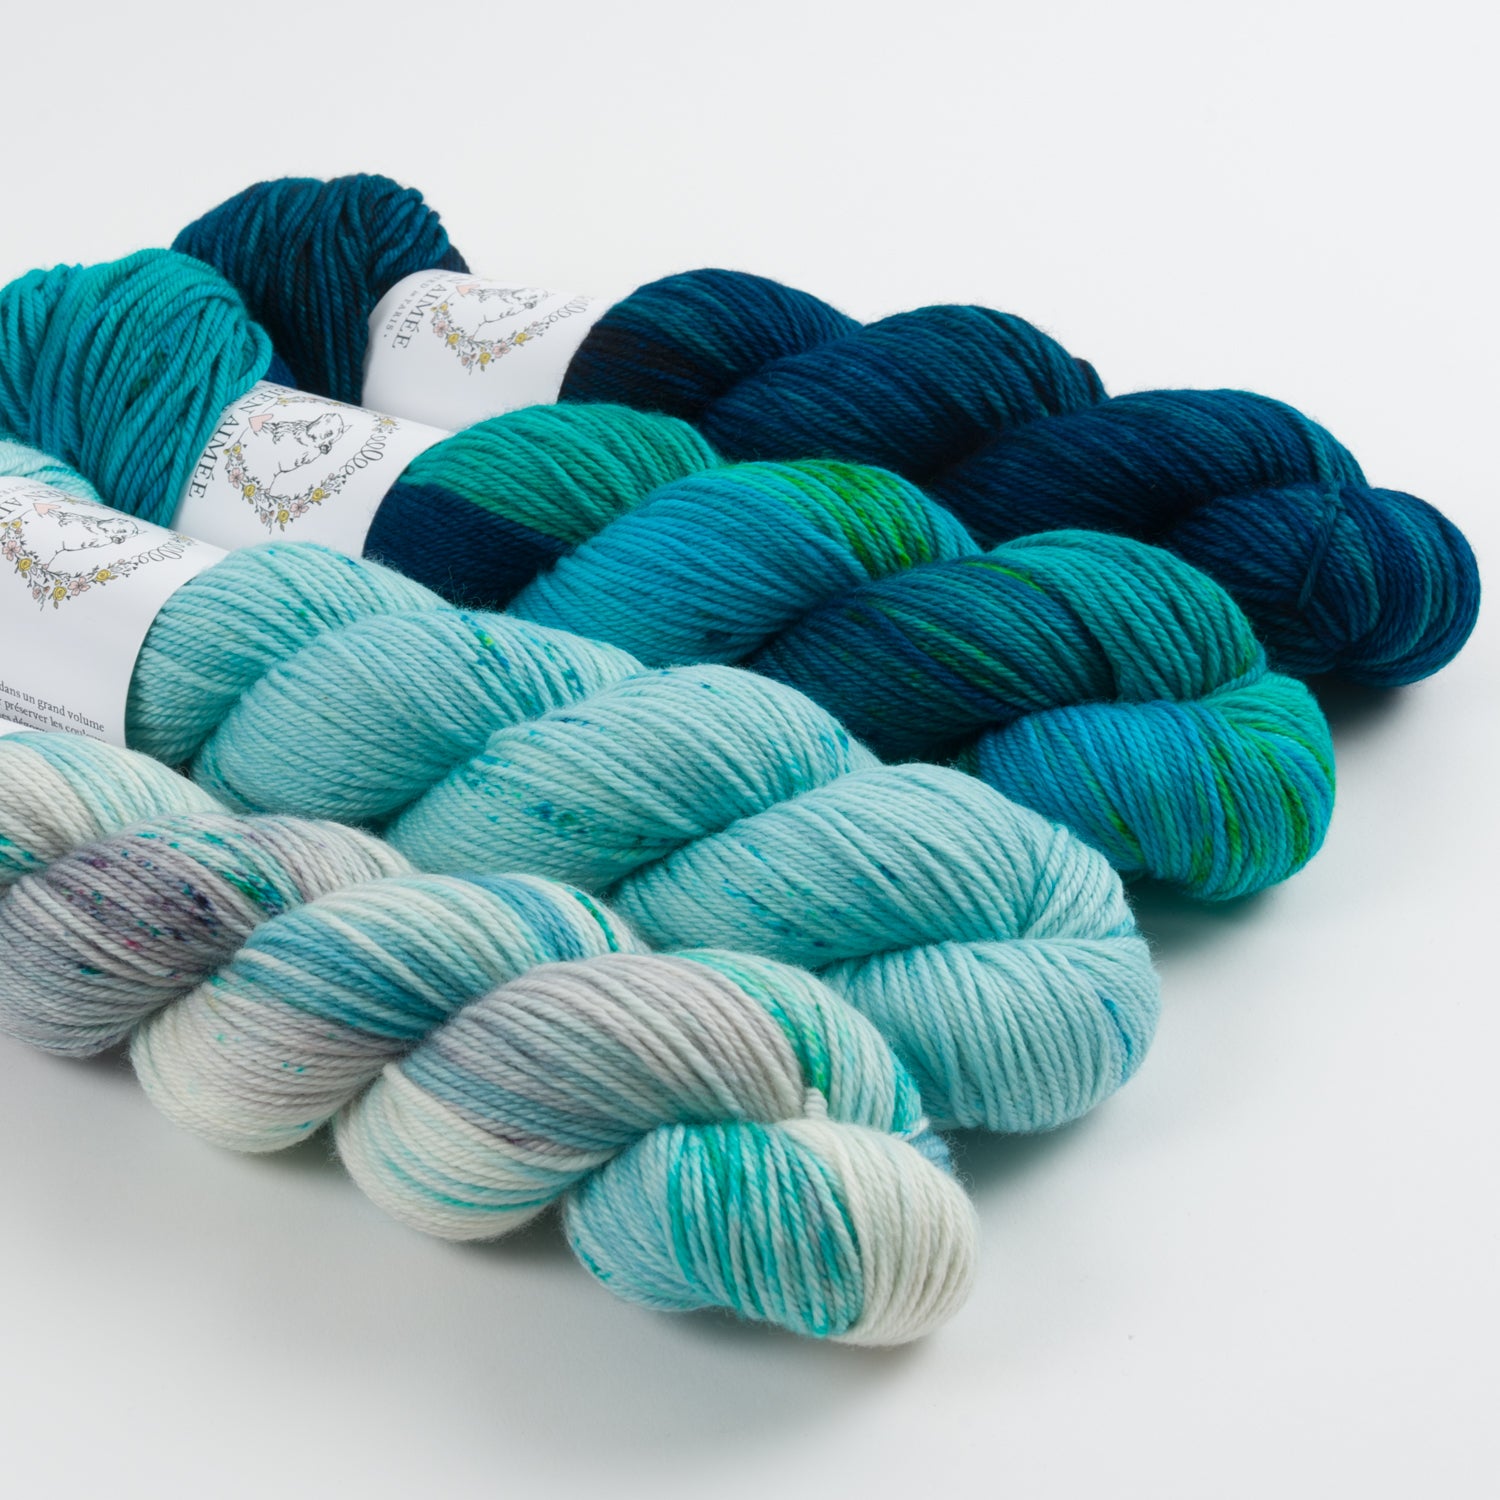 WESTKNITS KIT - ALICENT FADE